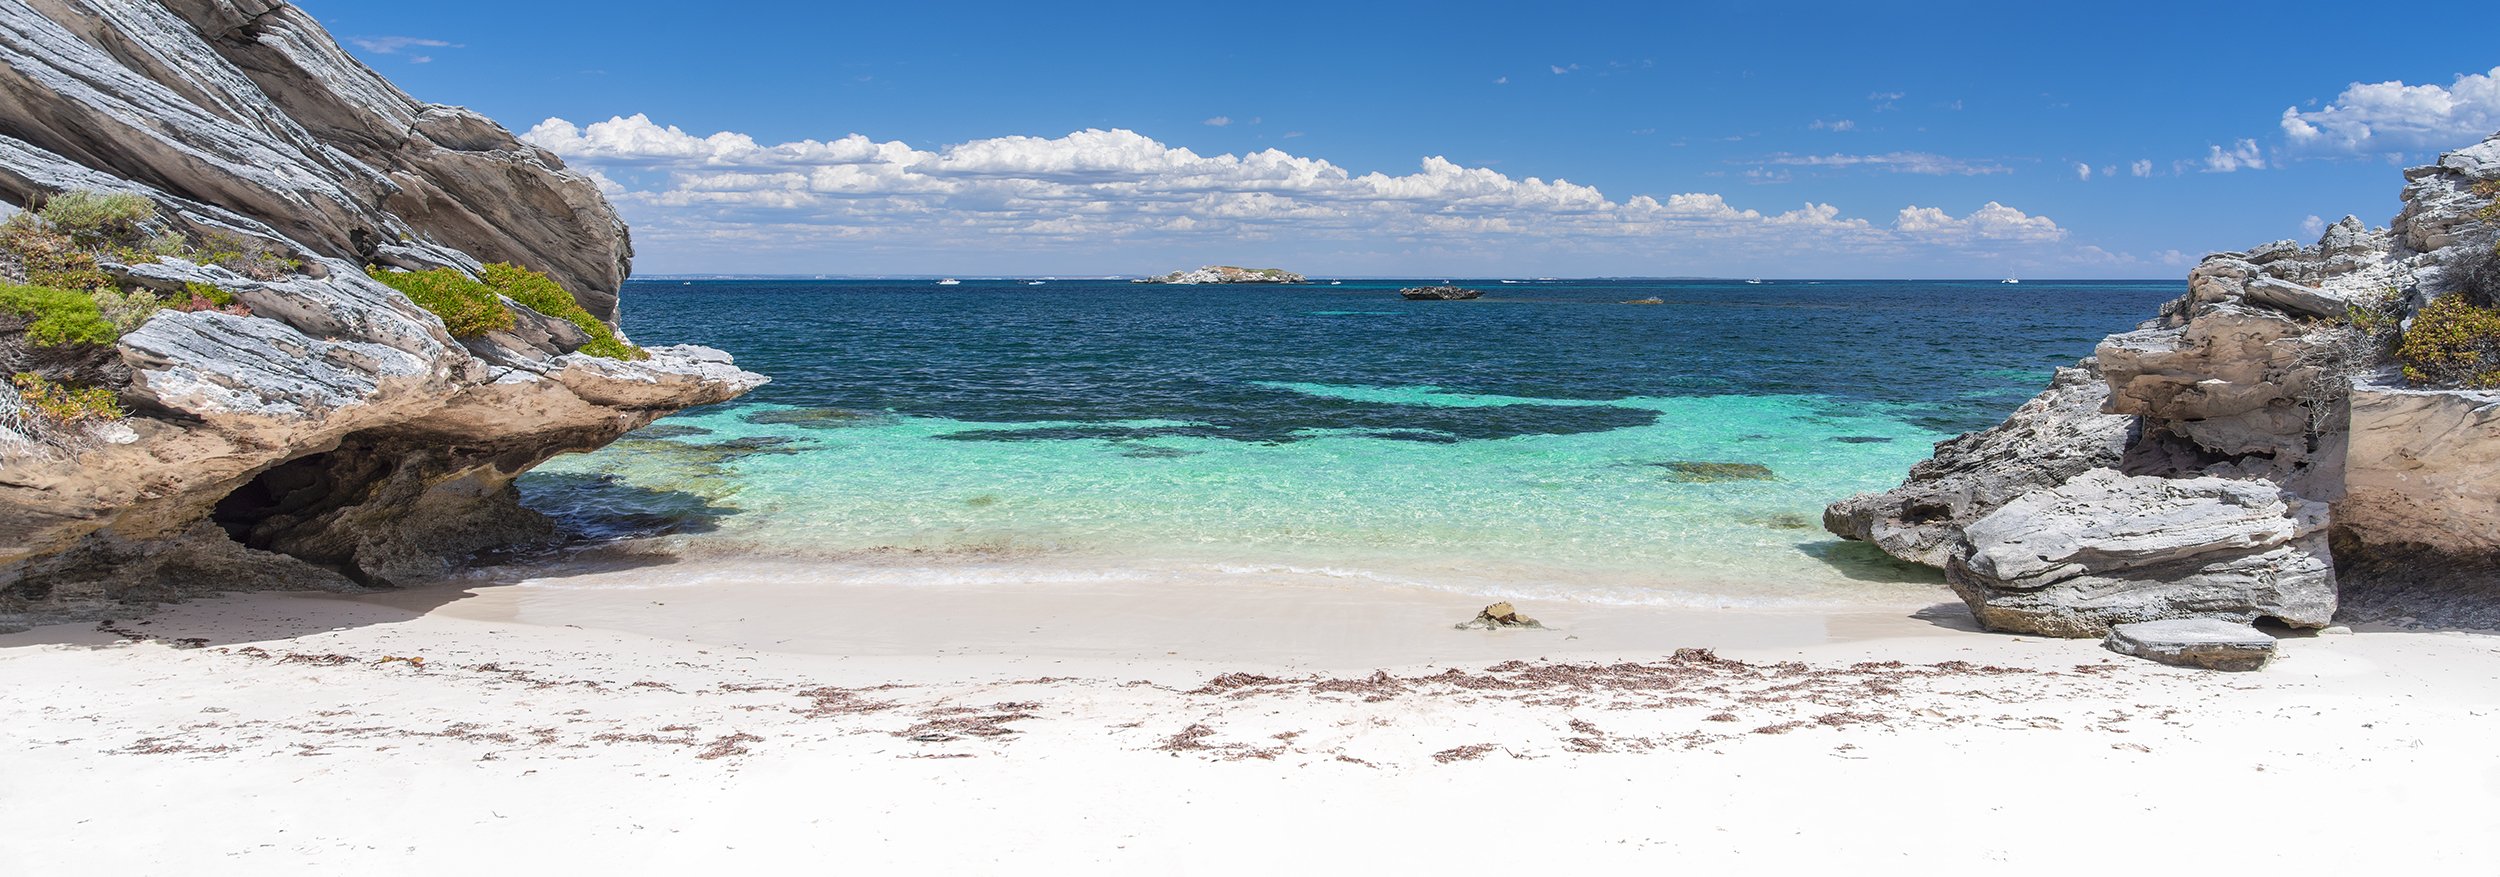 ROTTNEST ISLAND - YOUR PRIVATE BEACH AWAITS from $255 AUD